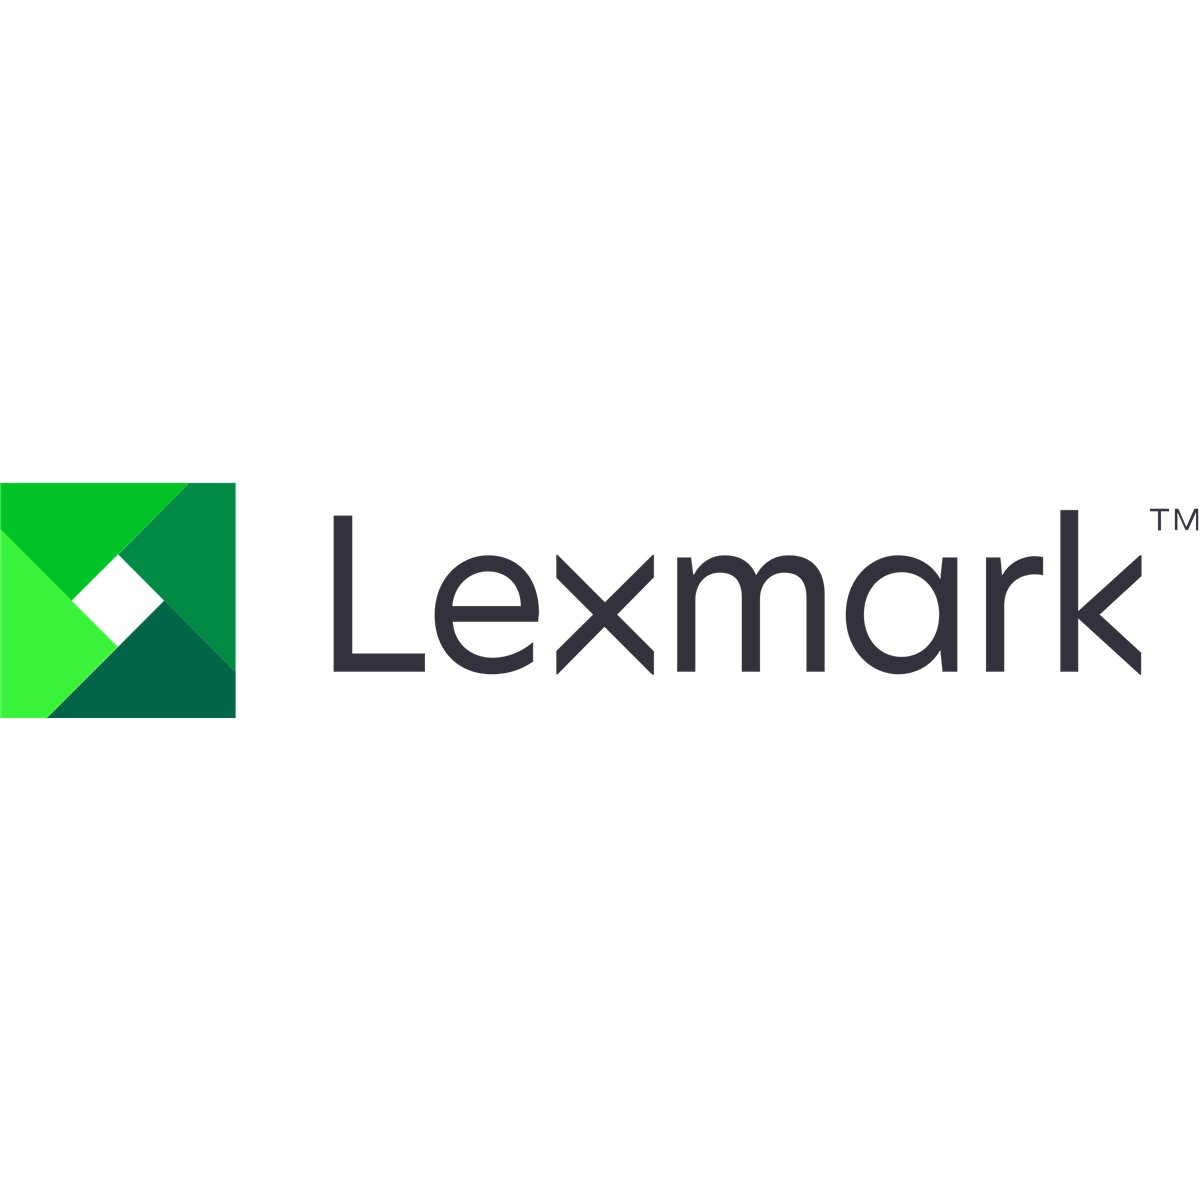 Lexmark Tray Insert and Drawer Lo